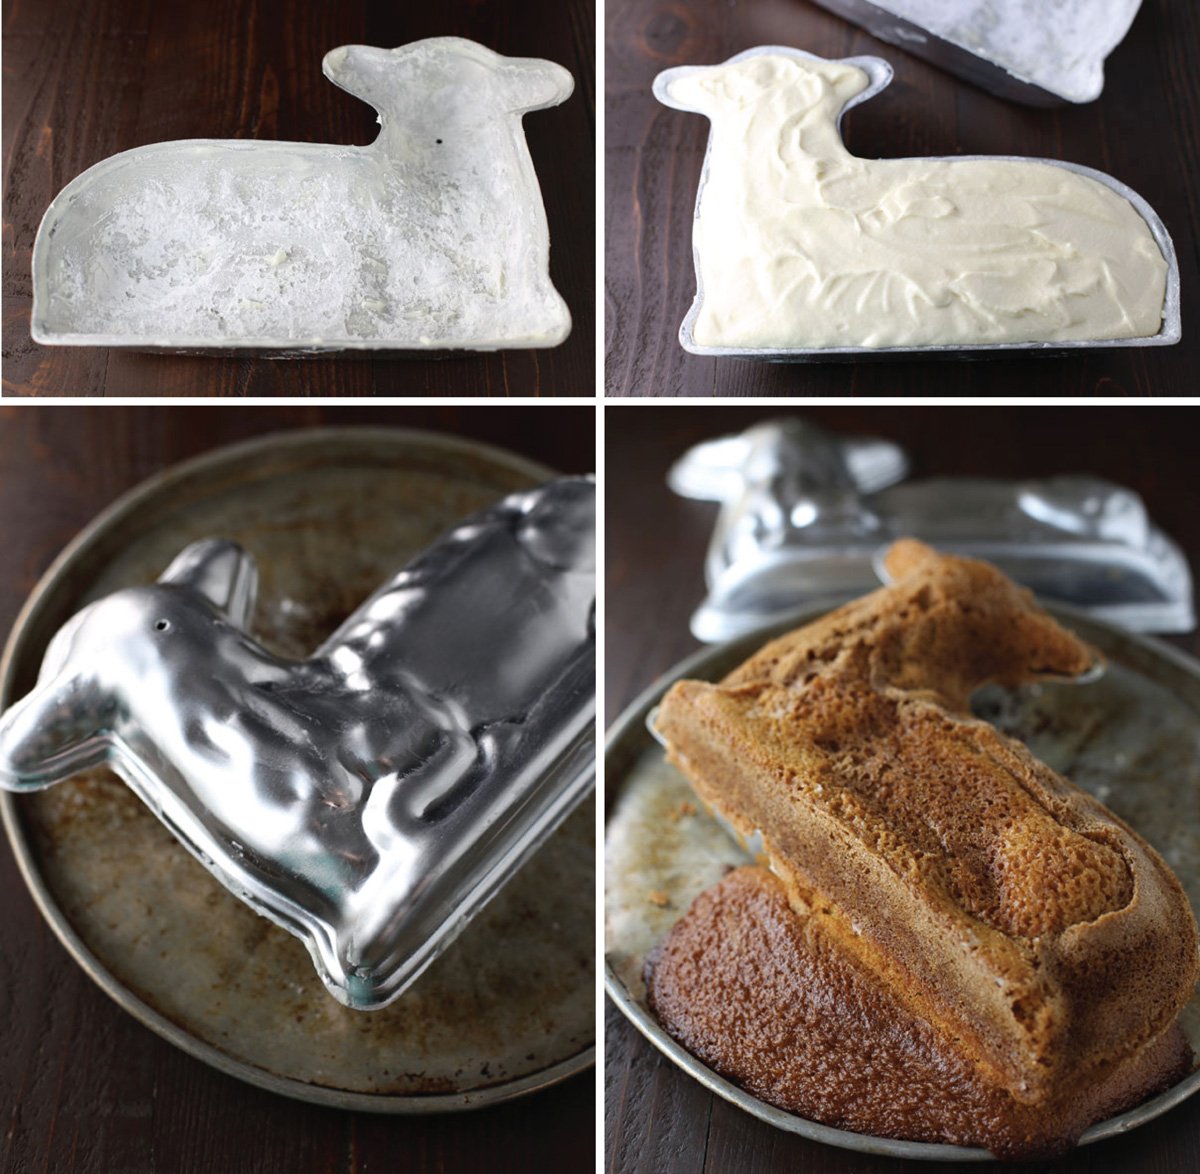 Steps showing how to make a 3D Easter lamb cake.